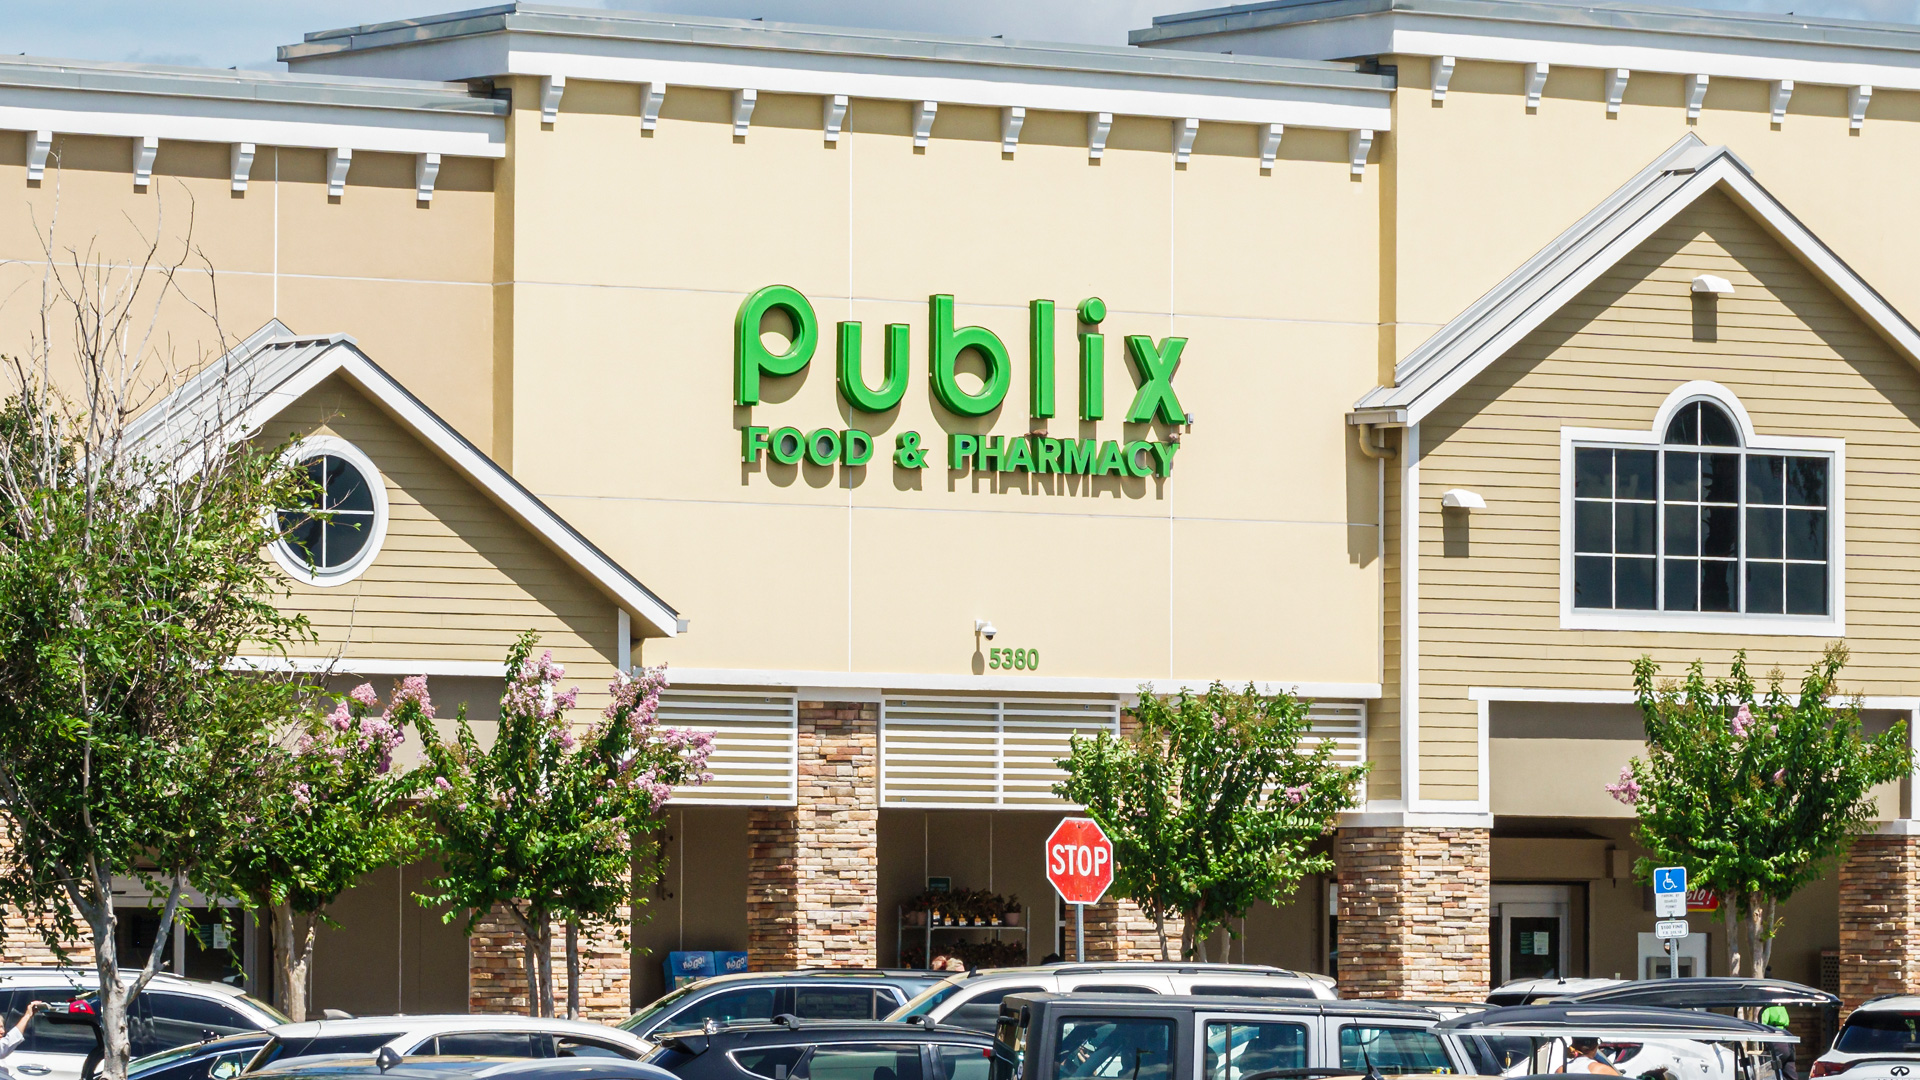 ‘Aldi is the only option,’ cry desperate Publix shoppers threatening to ‘boycott’ retailer over price hikes [Video]